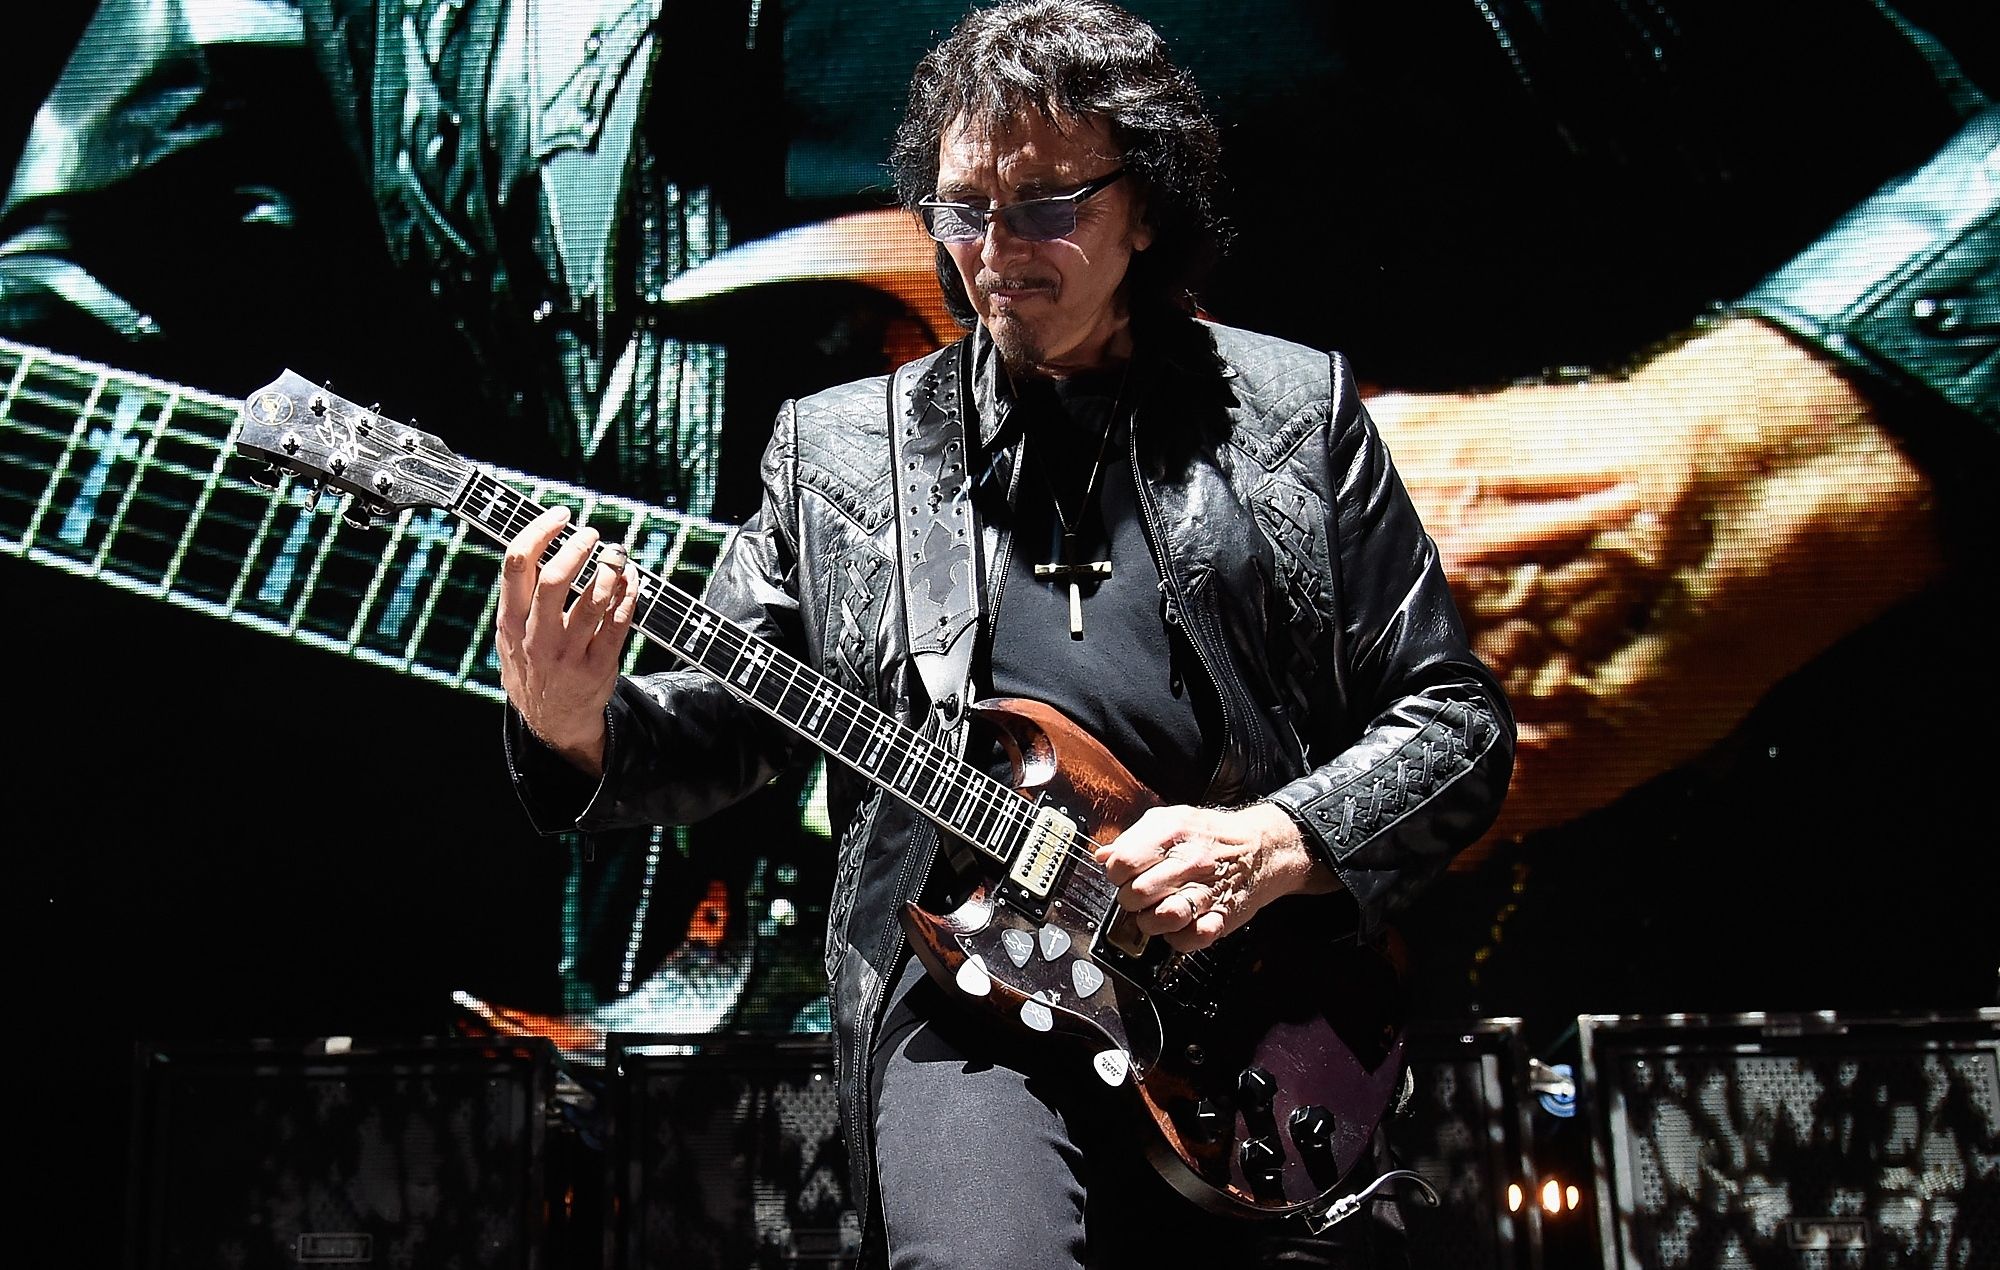 Tony Iommi says he wants to play more Black Sabbath shows